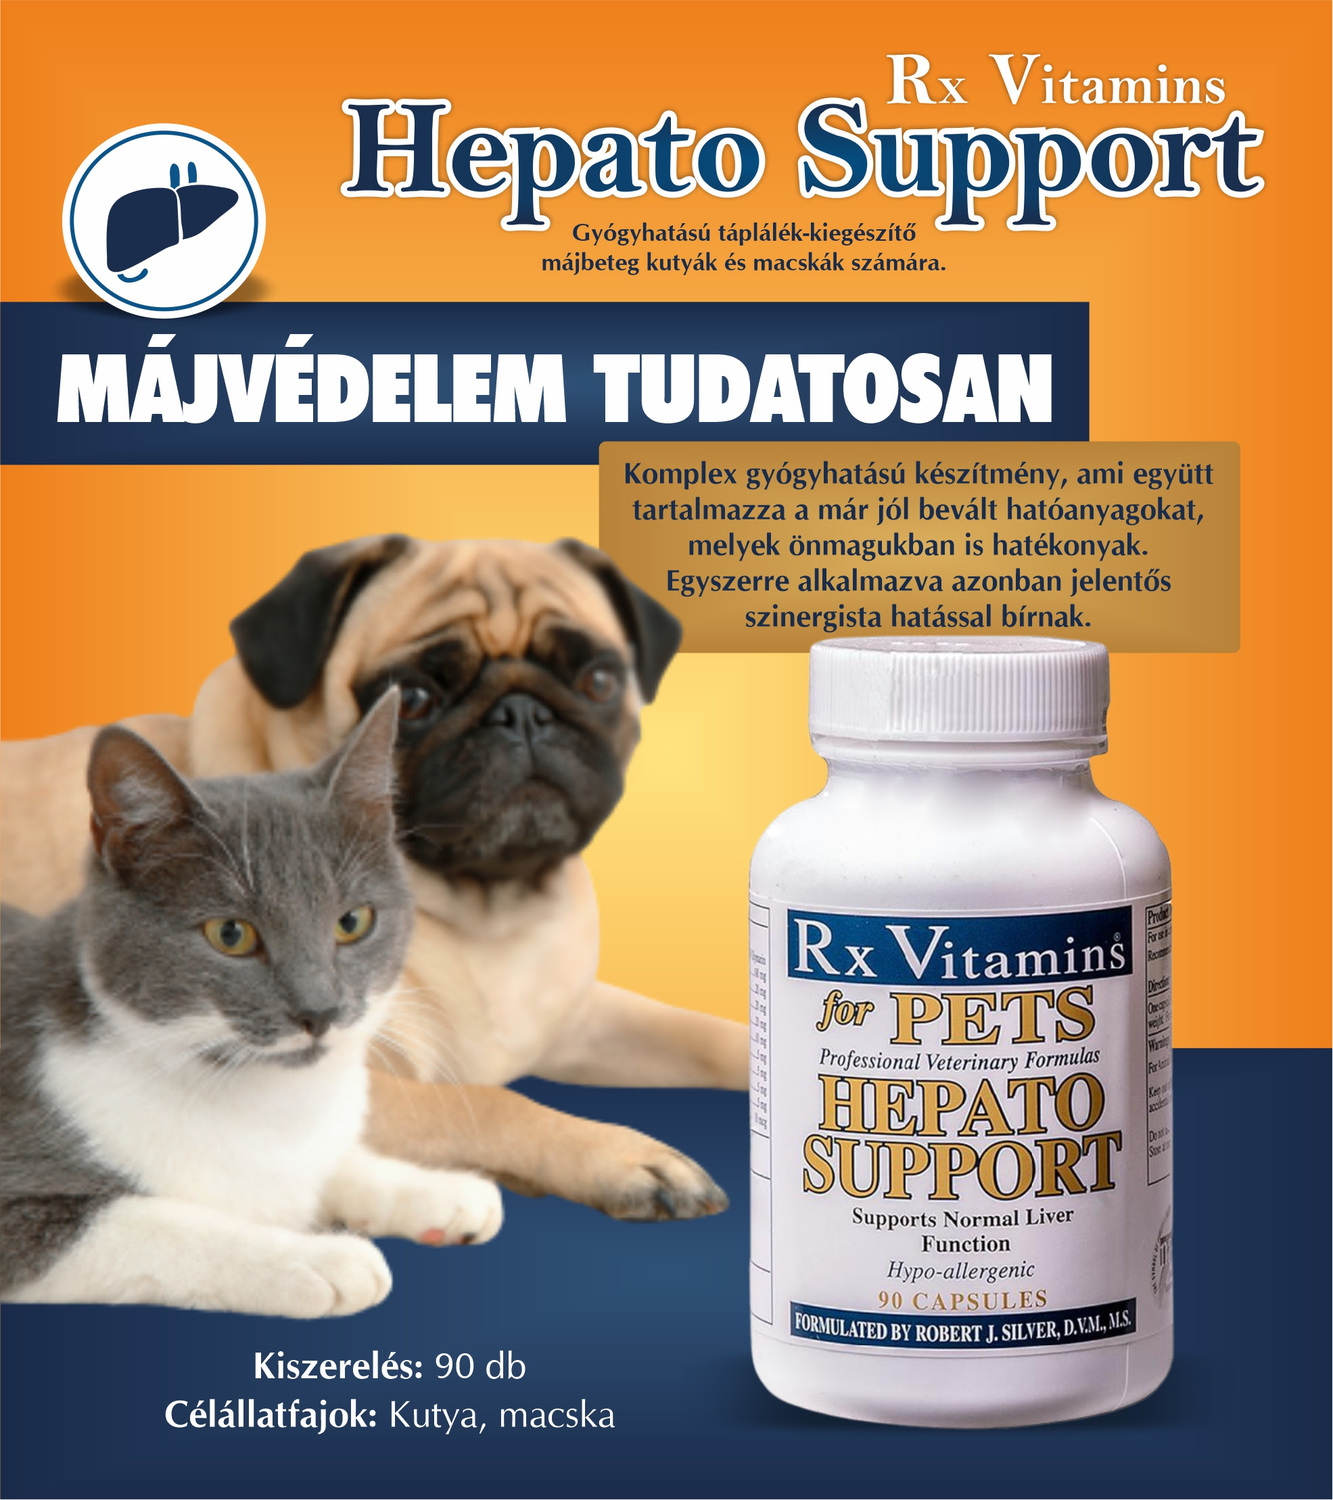 RX Vitamins Hepato Support tablete - zoom